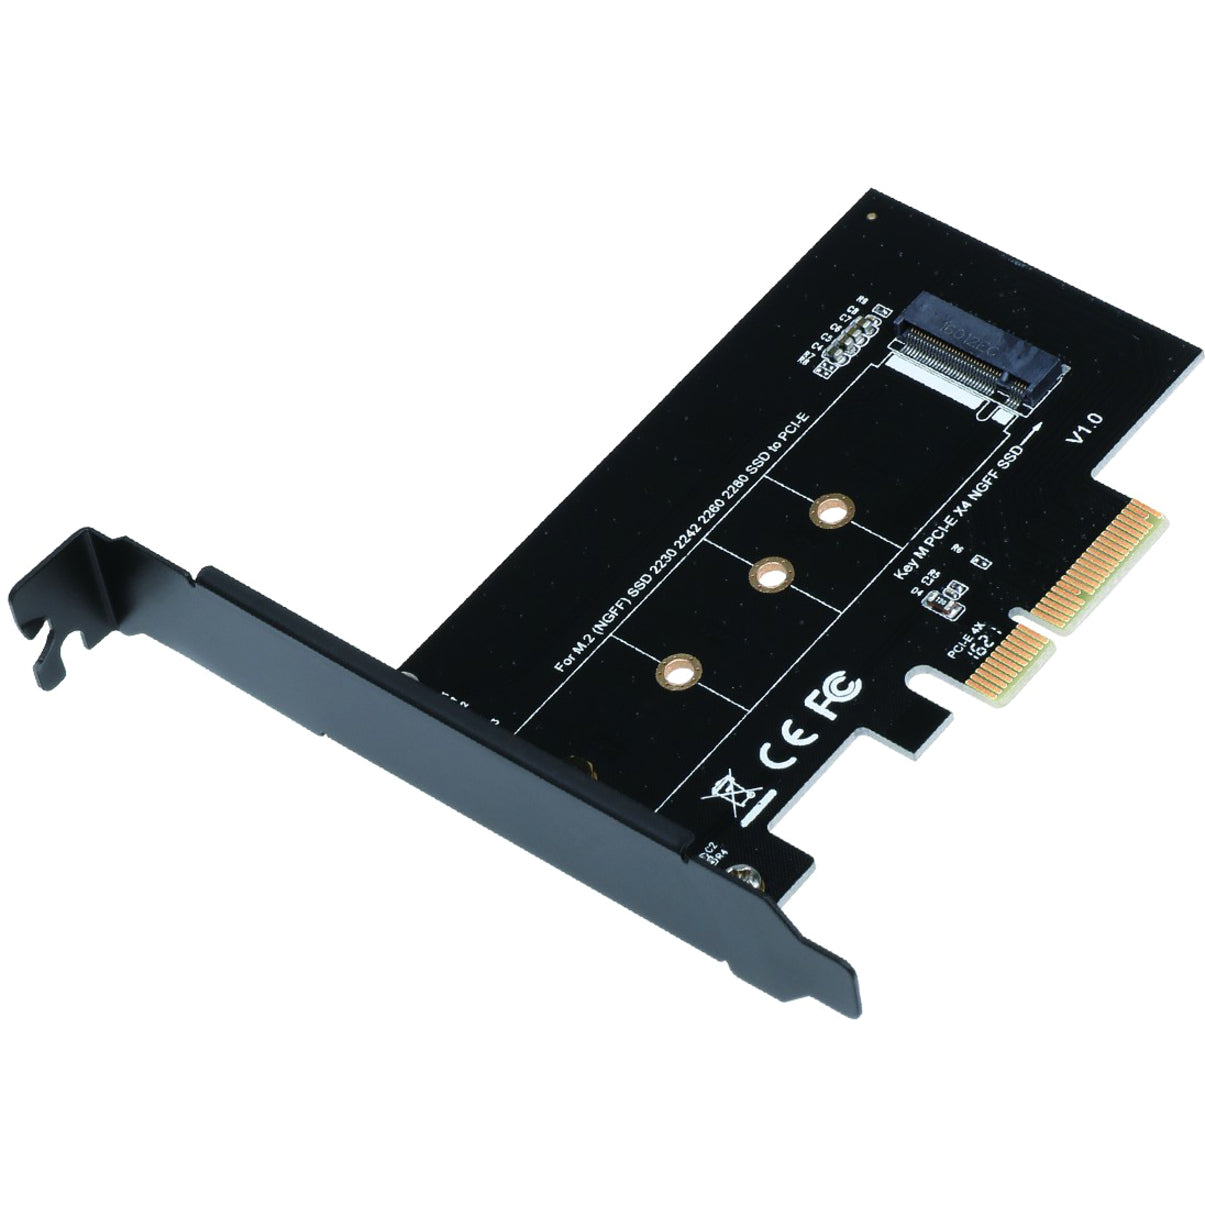 SIIG SC-M20014-S1 M.2 NGFF SSD PCIe Card Adapter, PCIe 3.0 Compliant, Black